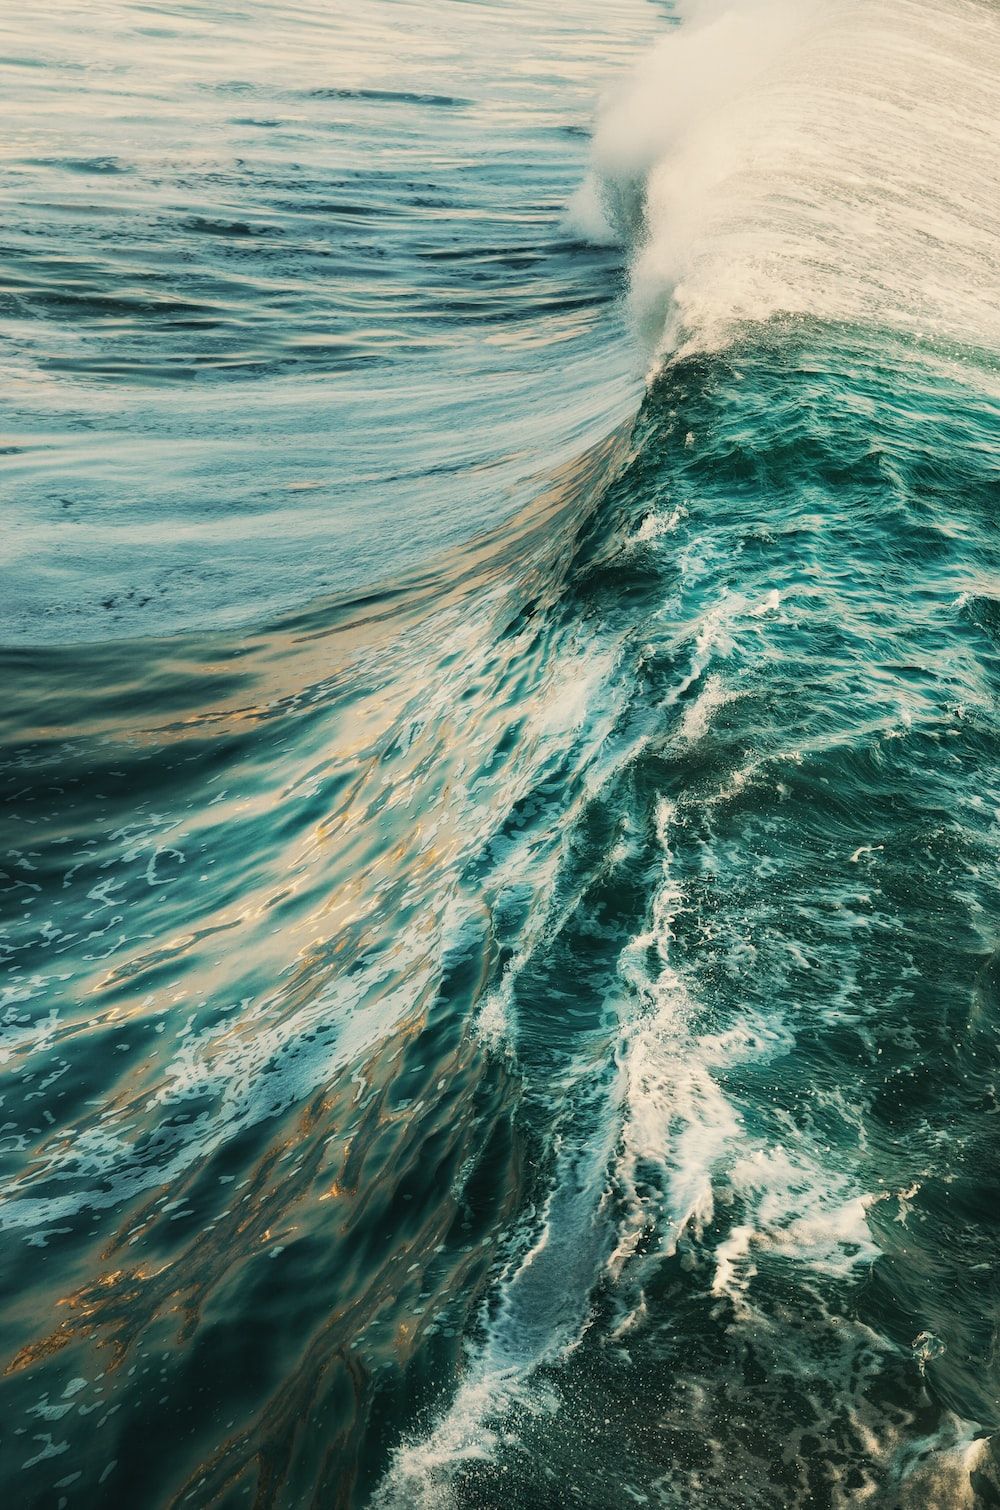 Wavy Picture. Download Free Image